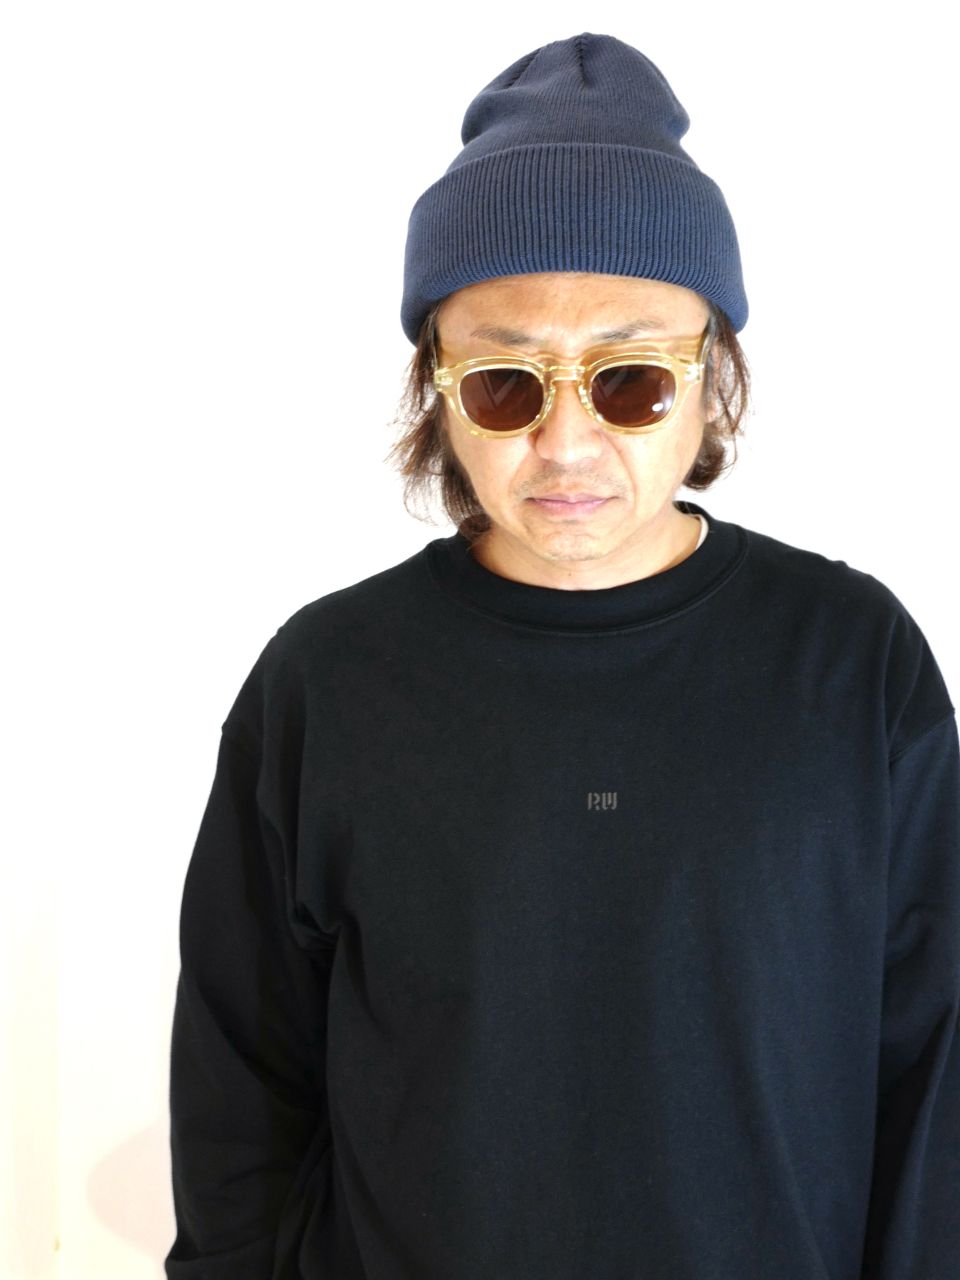 COOTIE PRODUCTIONS - 【ラスト1点】S/R Cuffed Beanie (SMOKE NAVY 